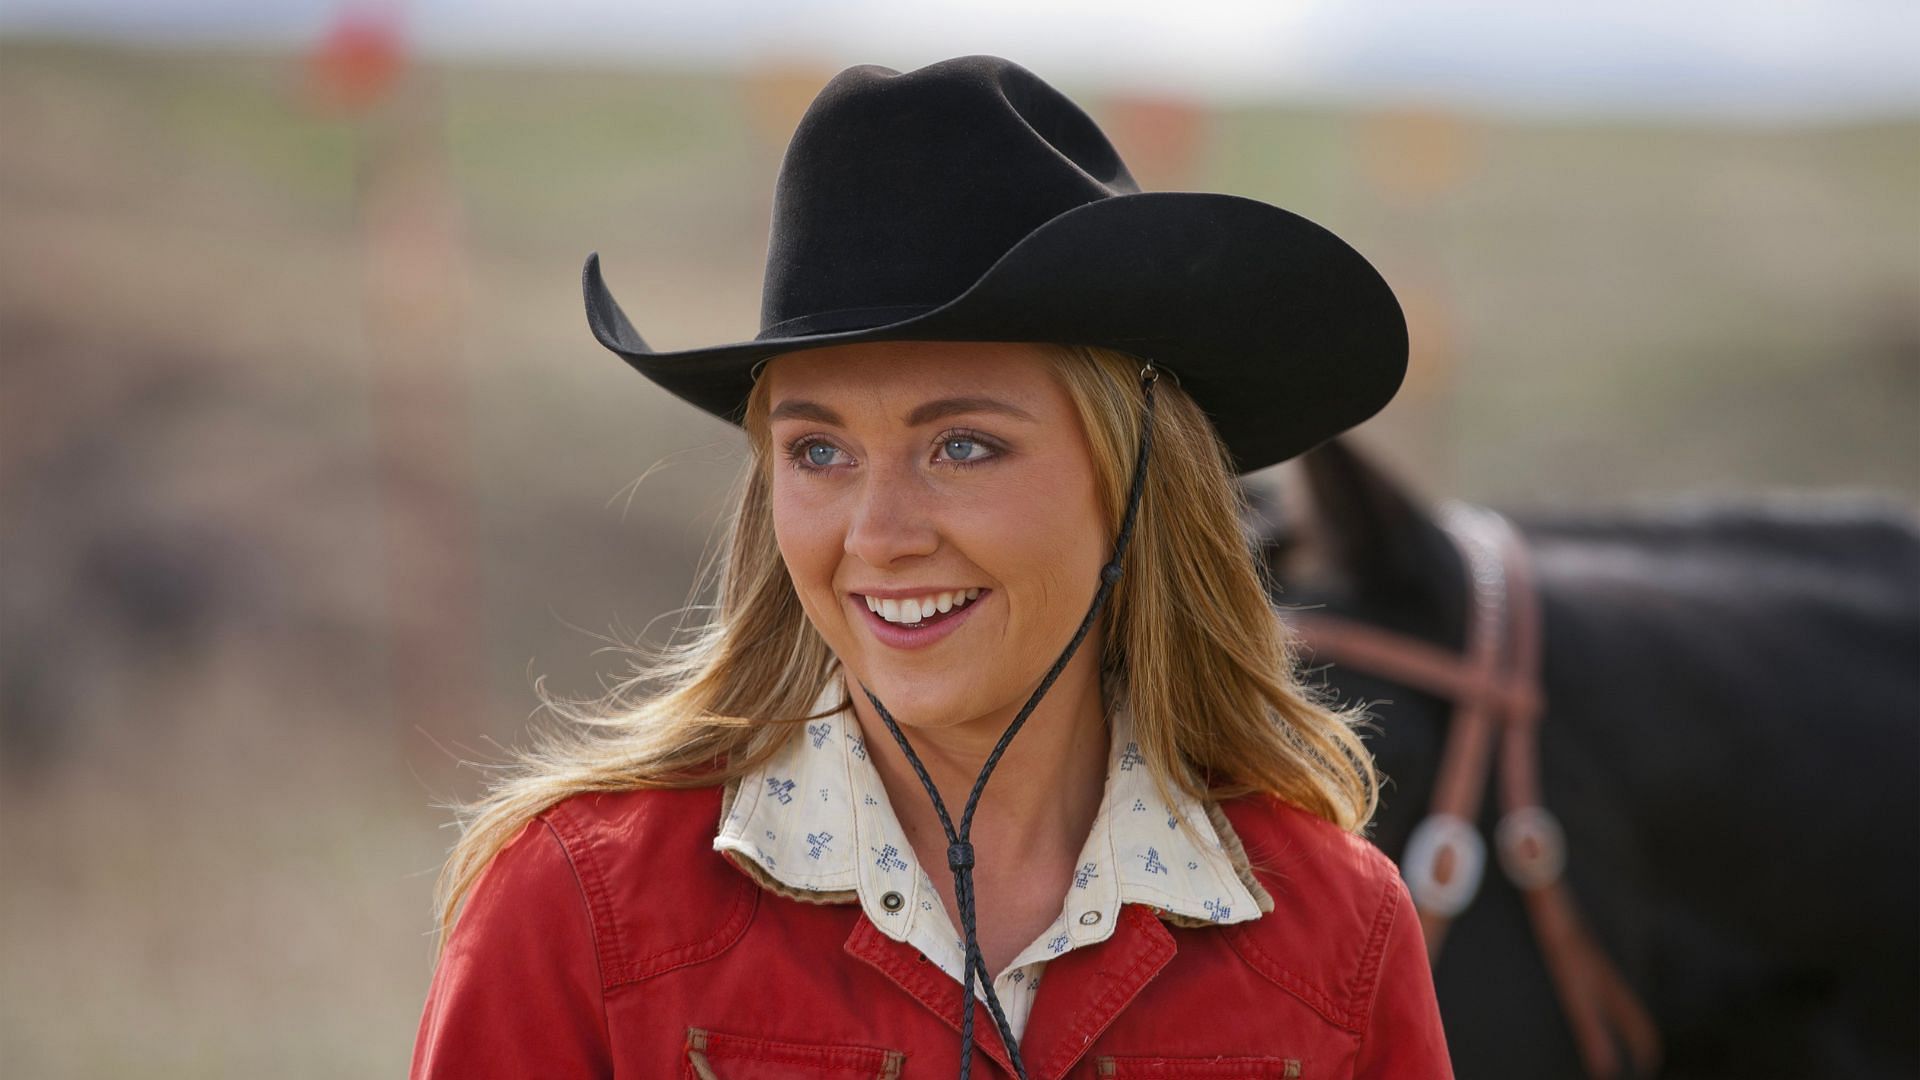 Heartland fans have been wishing for a stable love life for Amy (Image via CBC)